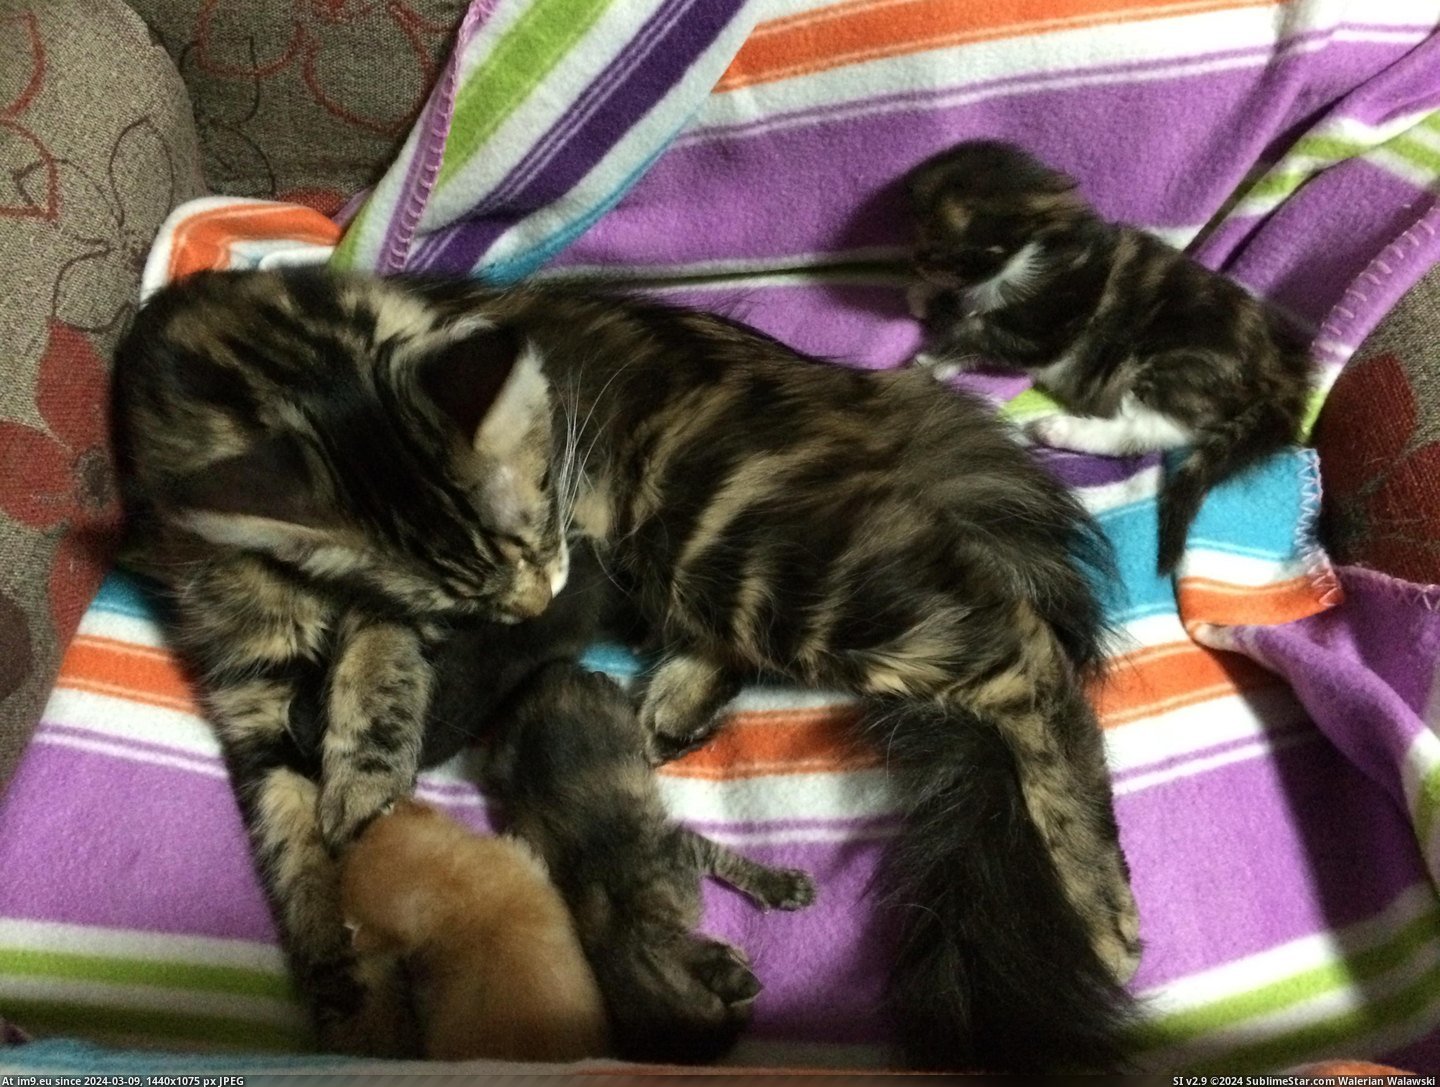 #Cats #Great #Kitten #Local #Choice #Coon #Momma #Abandoned #Kittens #Shelter #Maine [Cats] My Maine Coon momma only had 1 kitten, a local shelter had 3 abandoned kittens; we made a great choice. Pic. (Изображение из альбом My r/CATS favs))